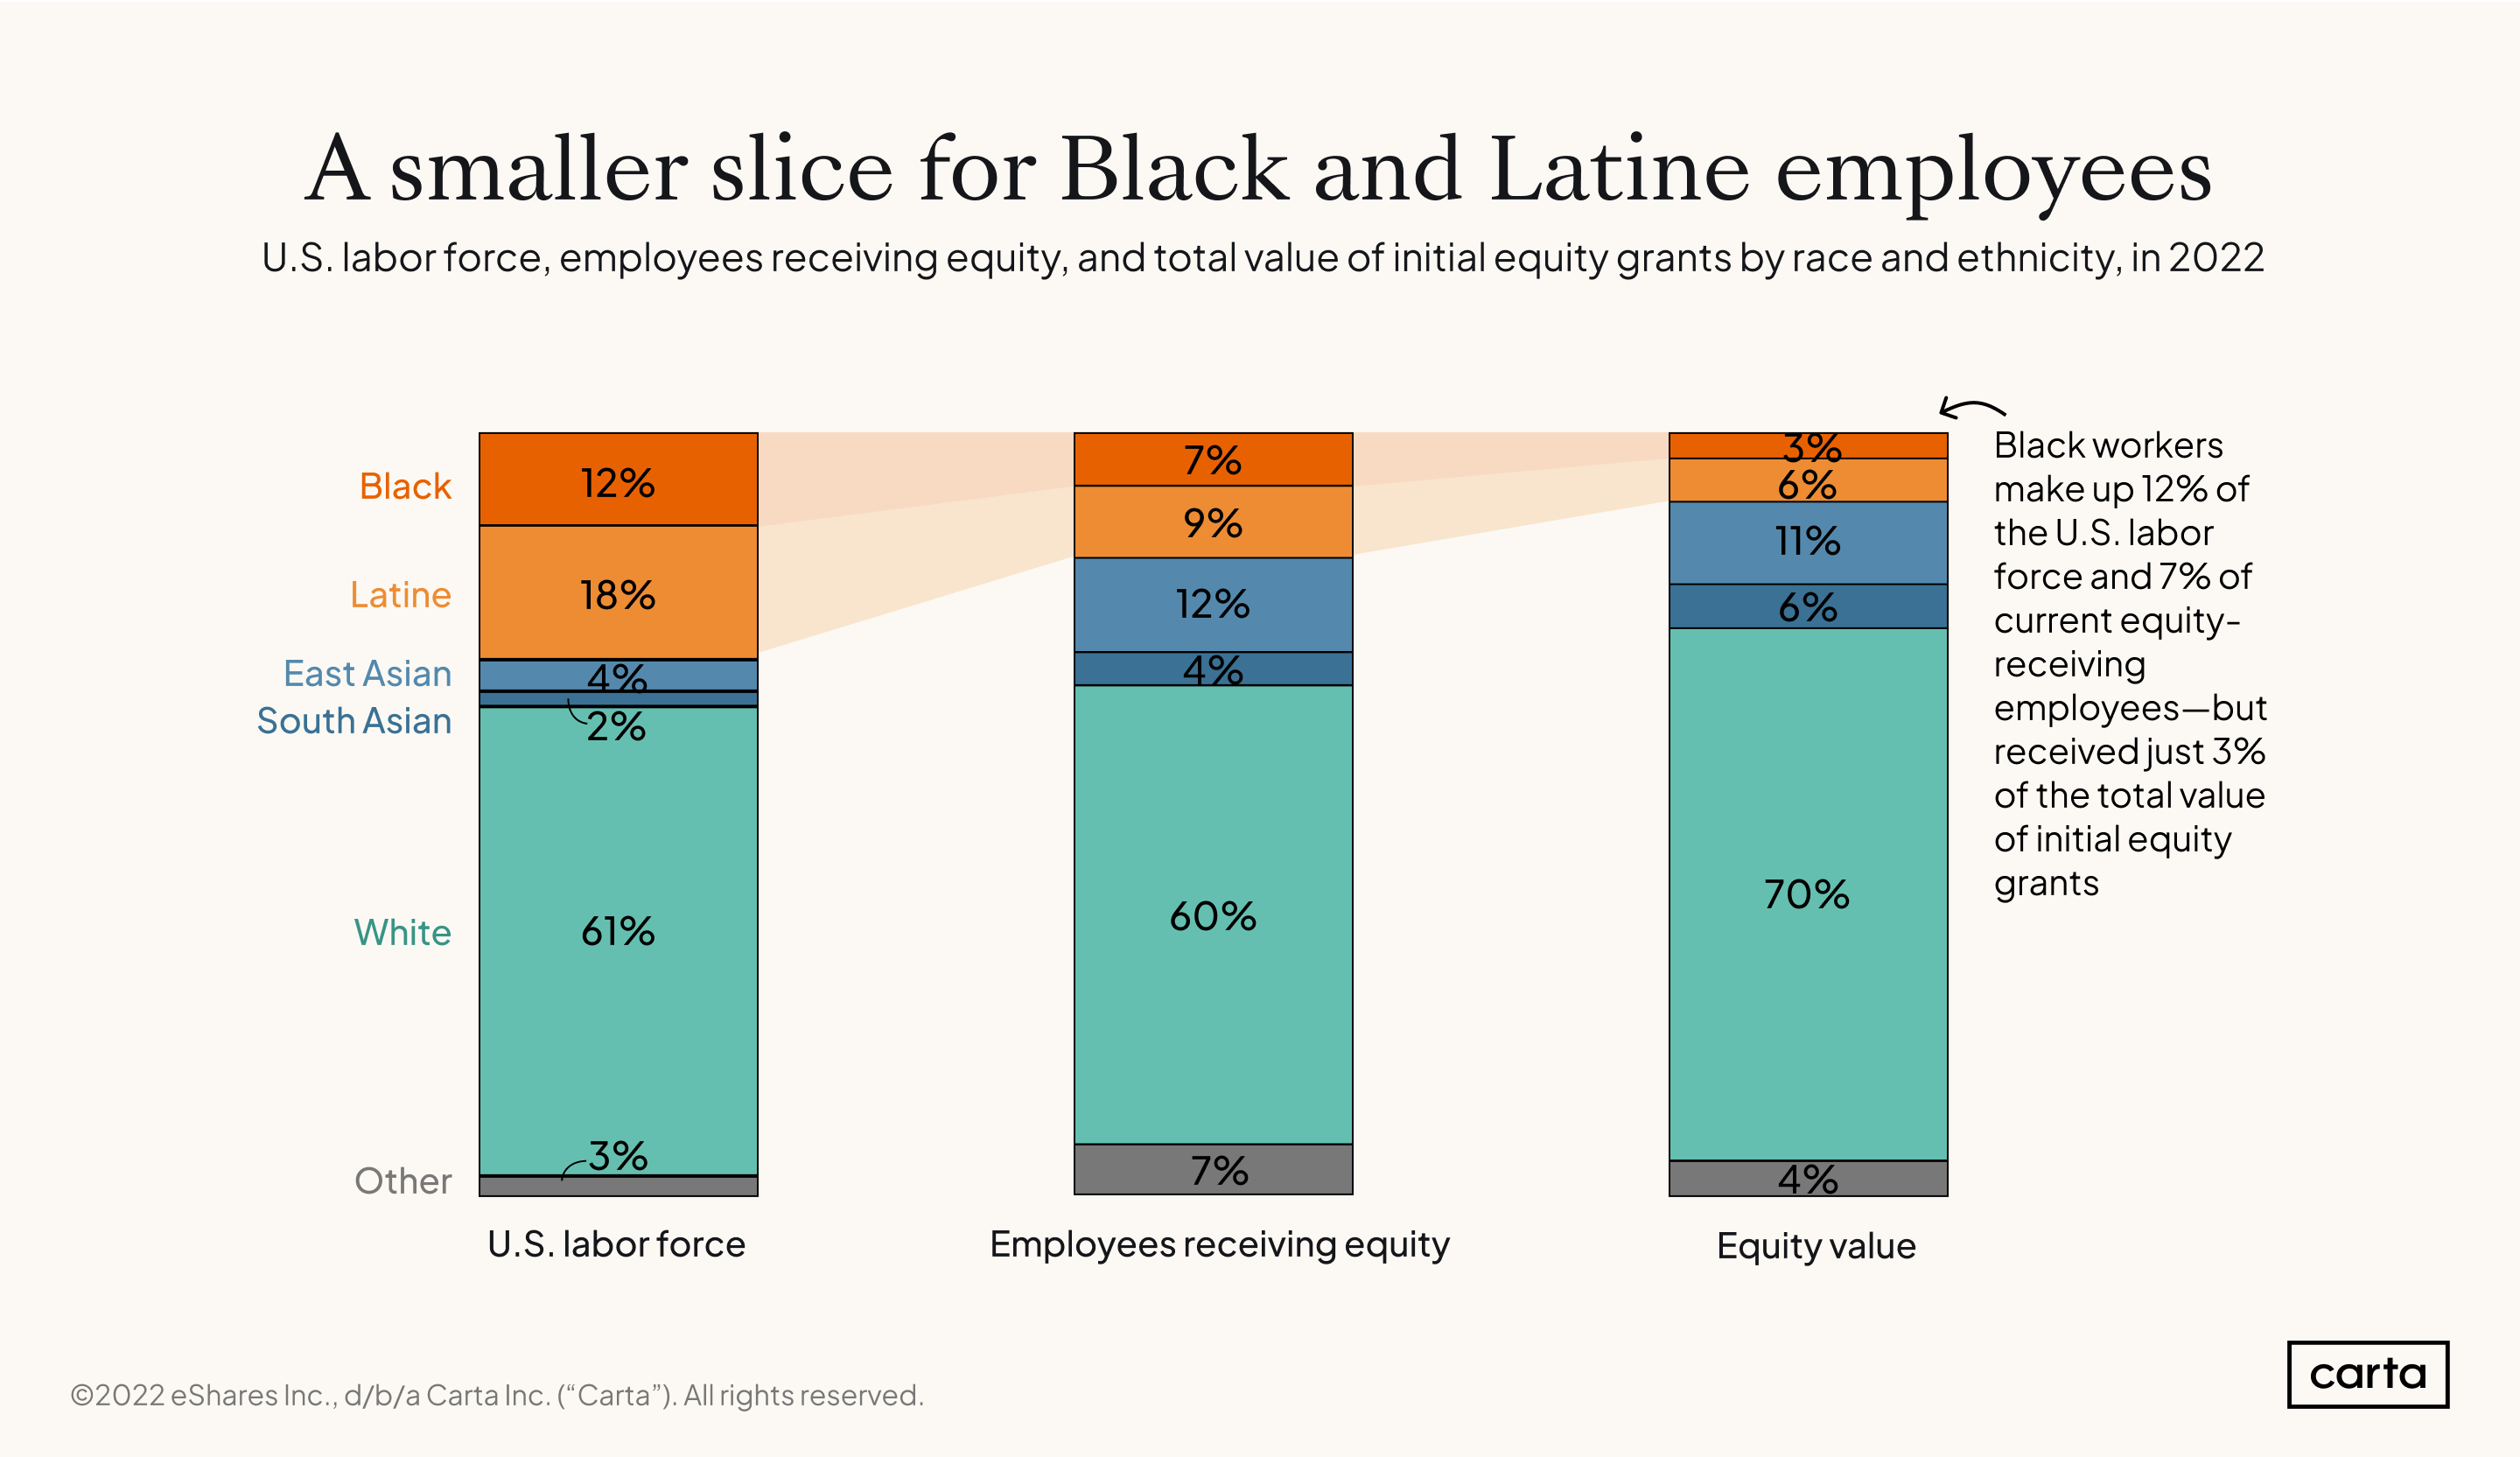 CES Equity and number of employees by race